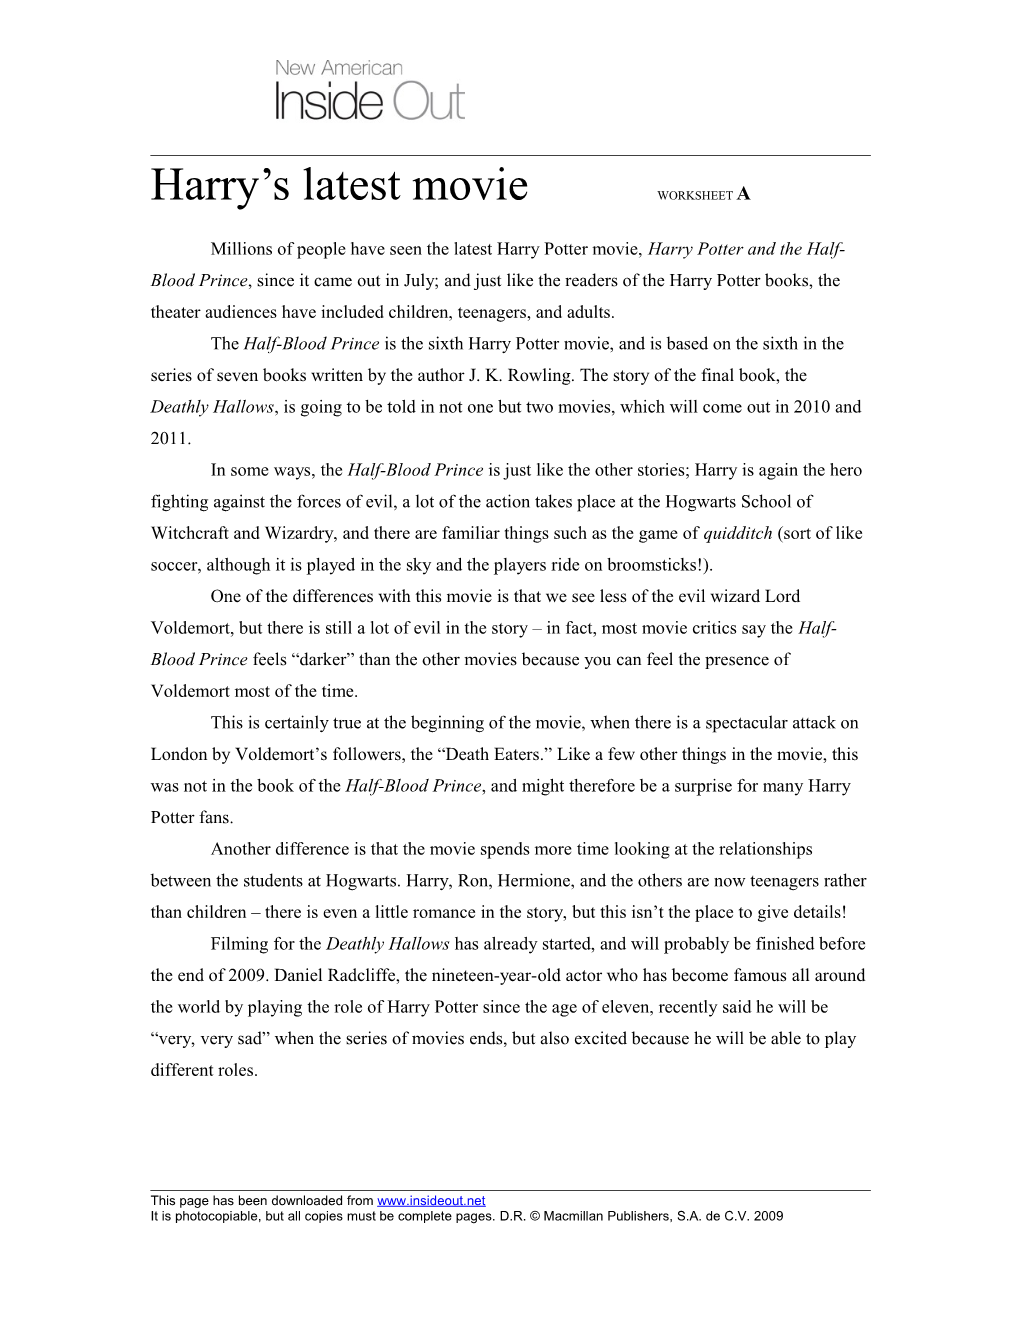 Harry Returns to the Cinema WORKSHEET A